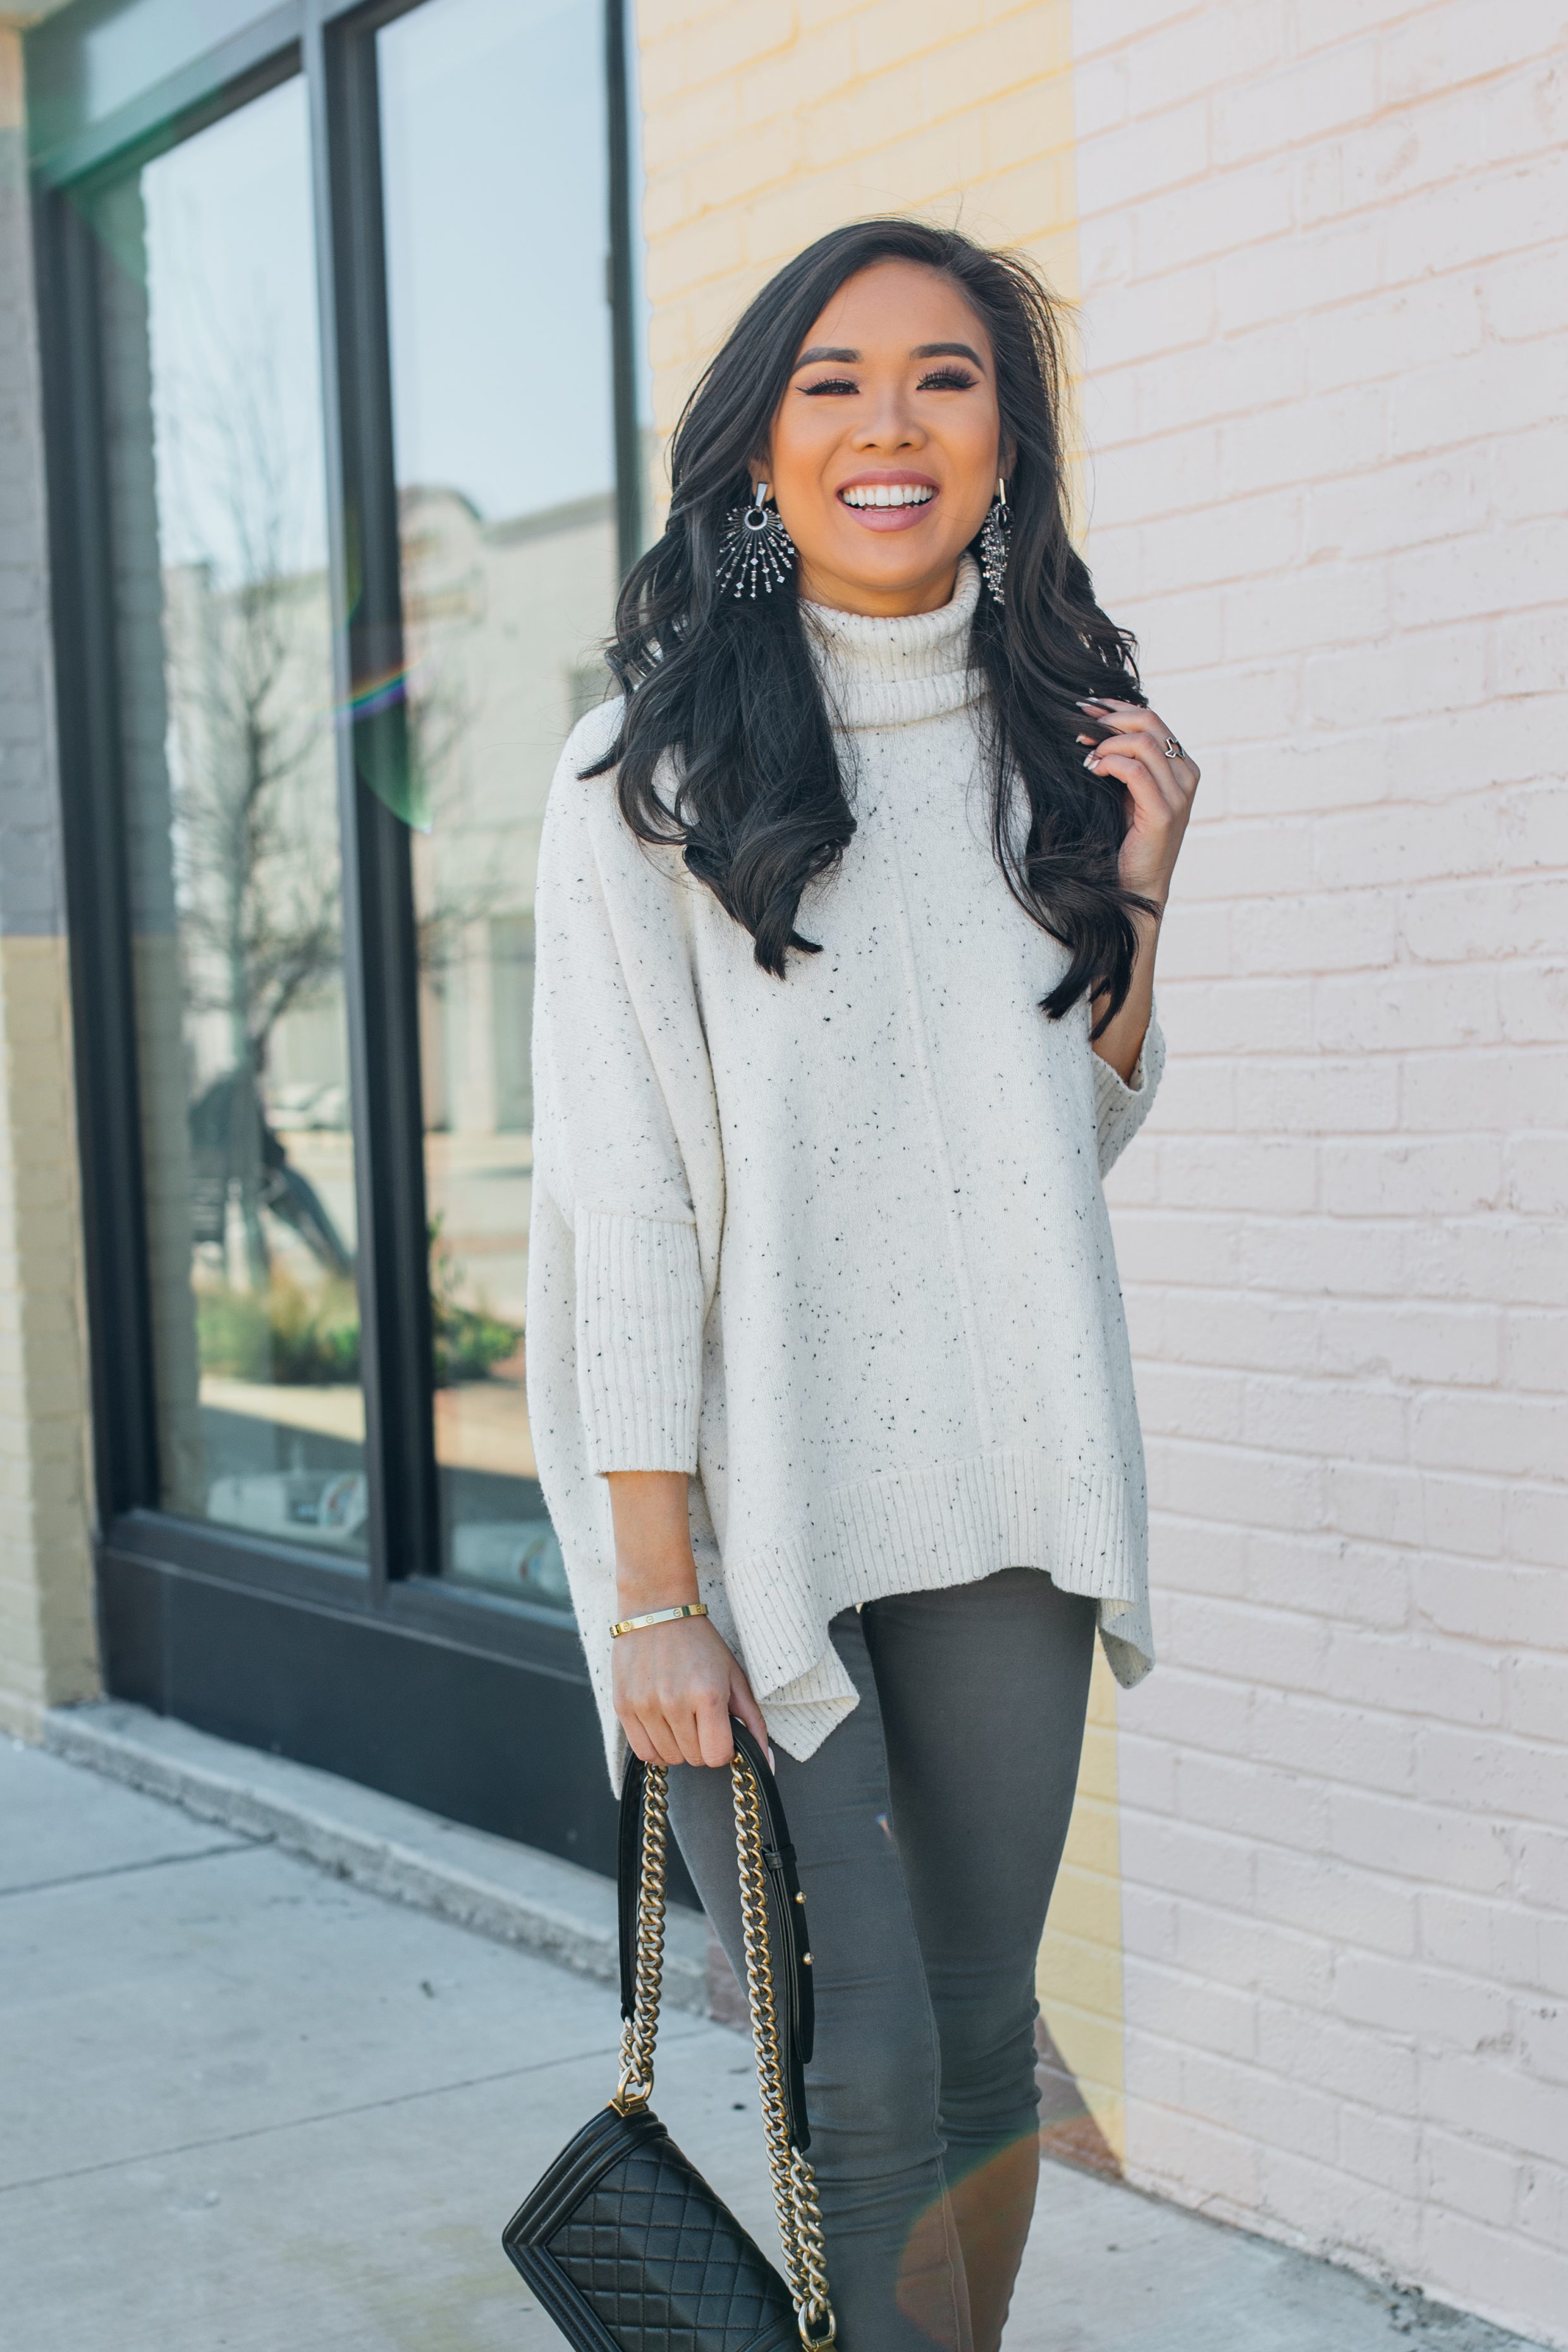 Blogger Hoang-Kim shares a casual winter outfit featuring a turtleneck poncho